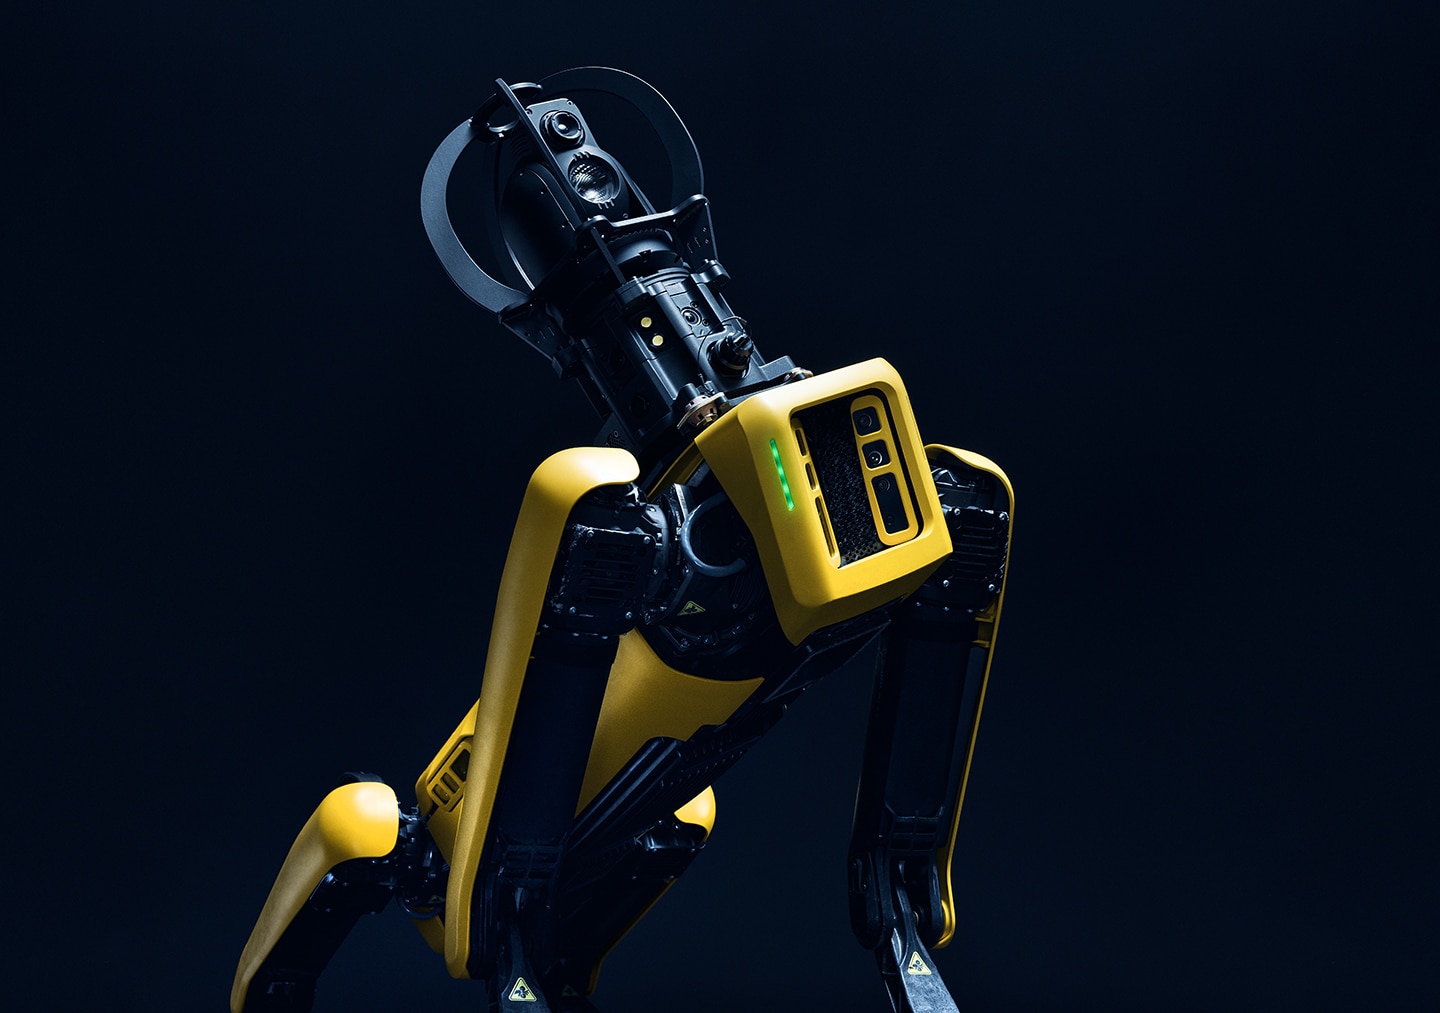 Spot, a yellow quadruped robot, equipped with an IR camera payload